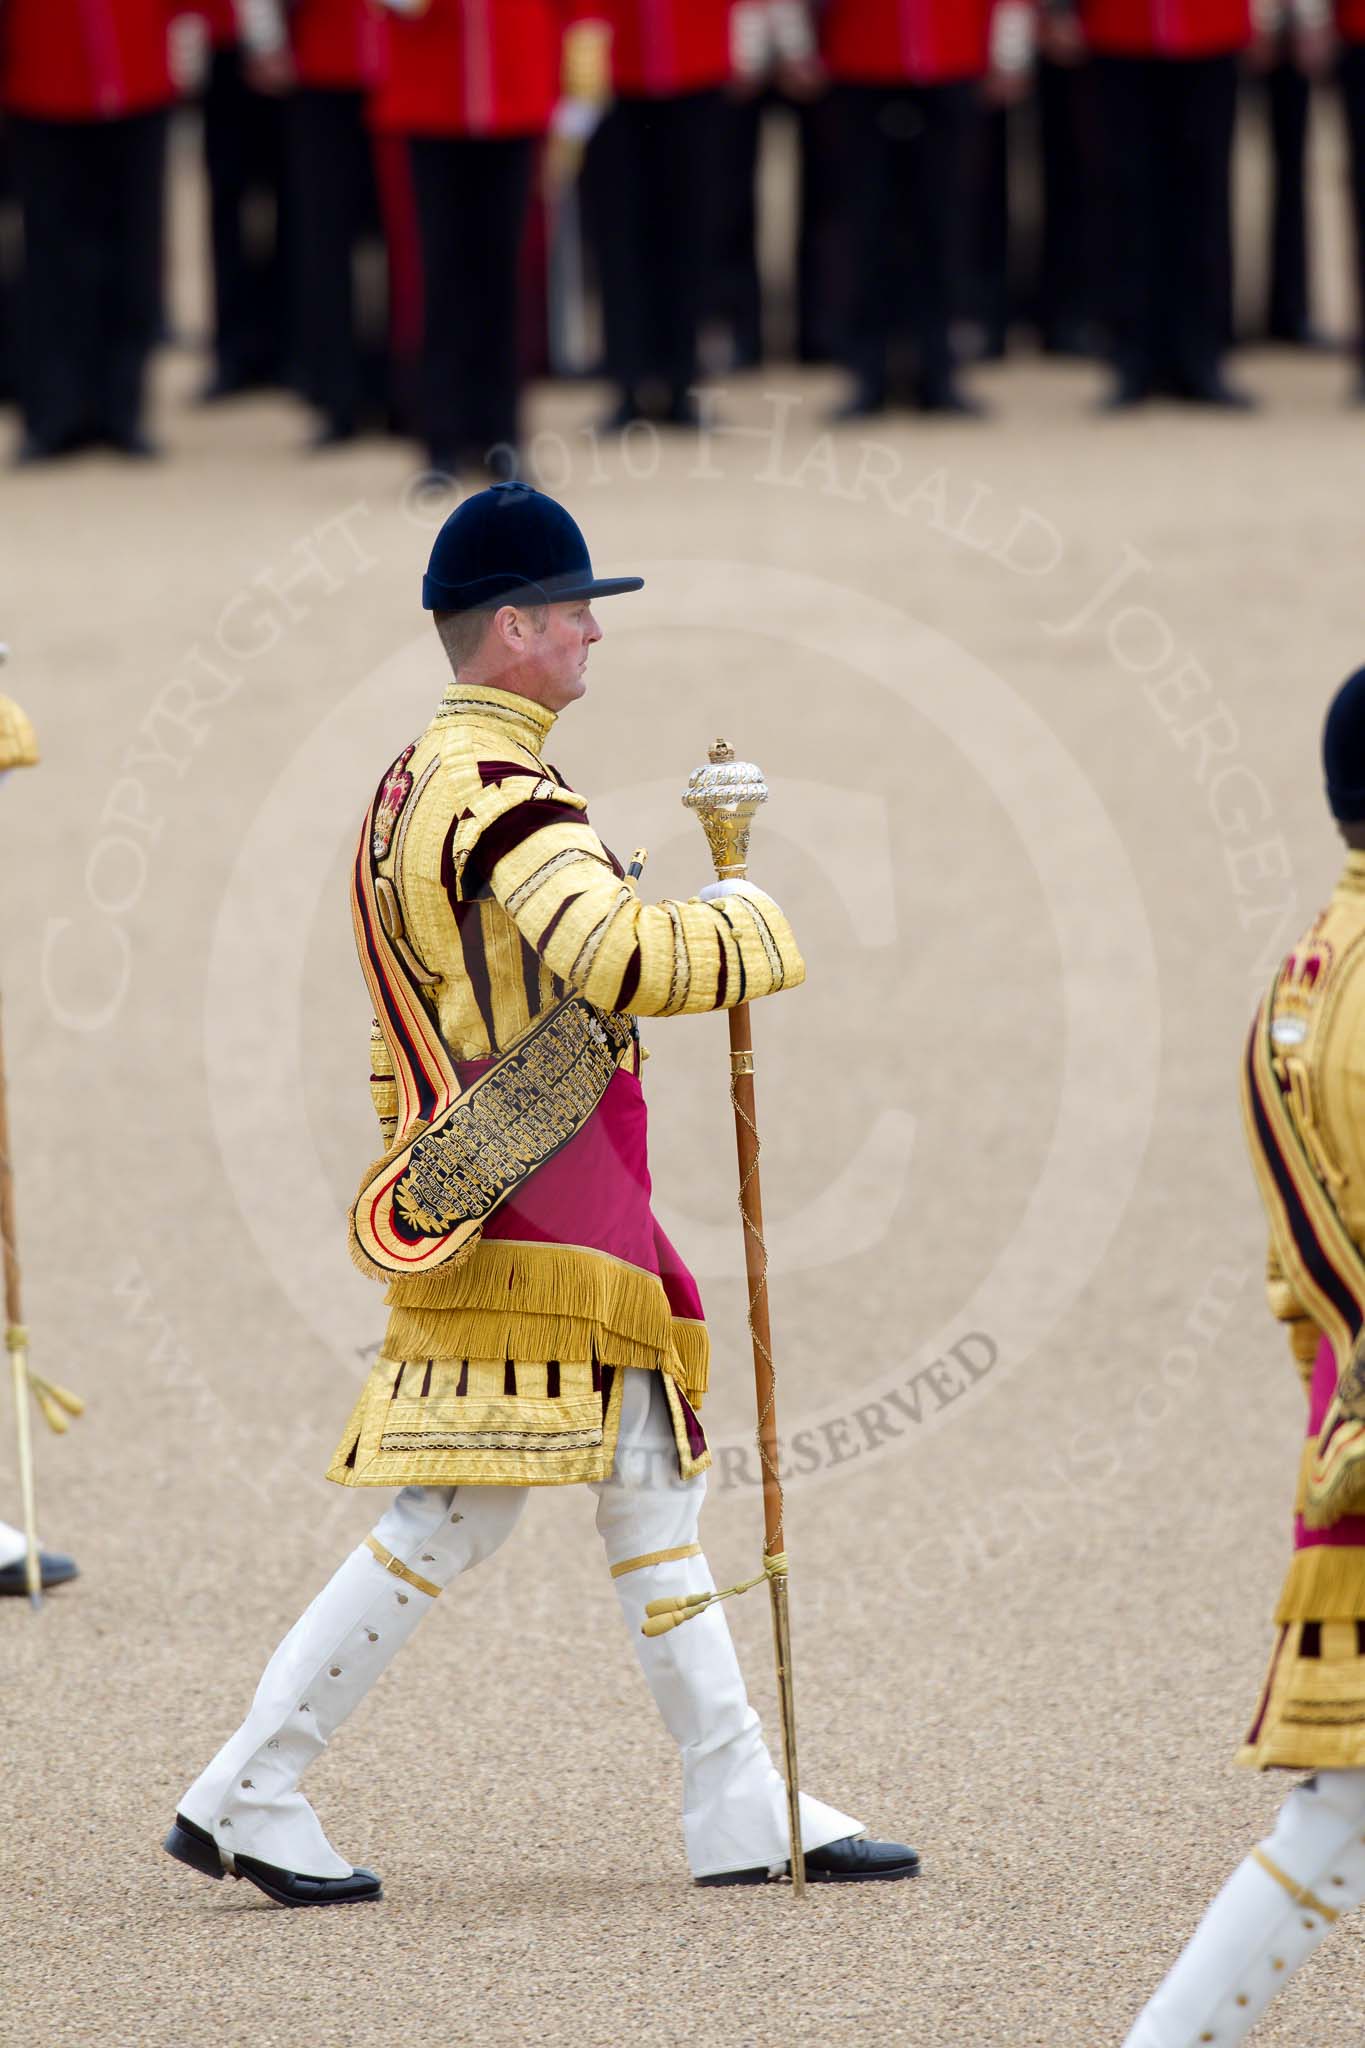 Trooping the Colour 2010: Senior Drum Major A 'Tony' Moors marching, together with his colleagues to the left and the right, leading the Massed Bands..
Horse Guards Parade, Westminster,
London SW1,
Greater London,
United Kingdom,
on 12 June 2010 at 11:09, image #104